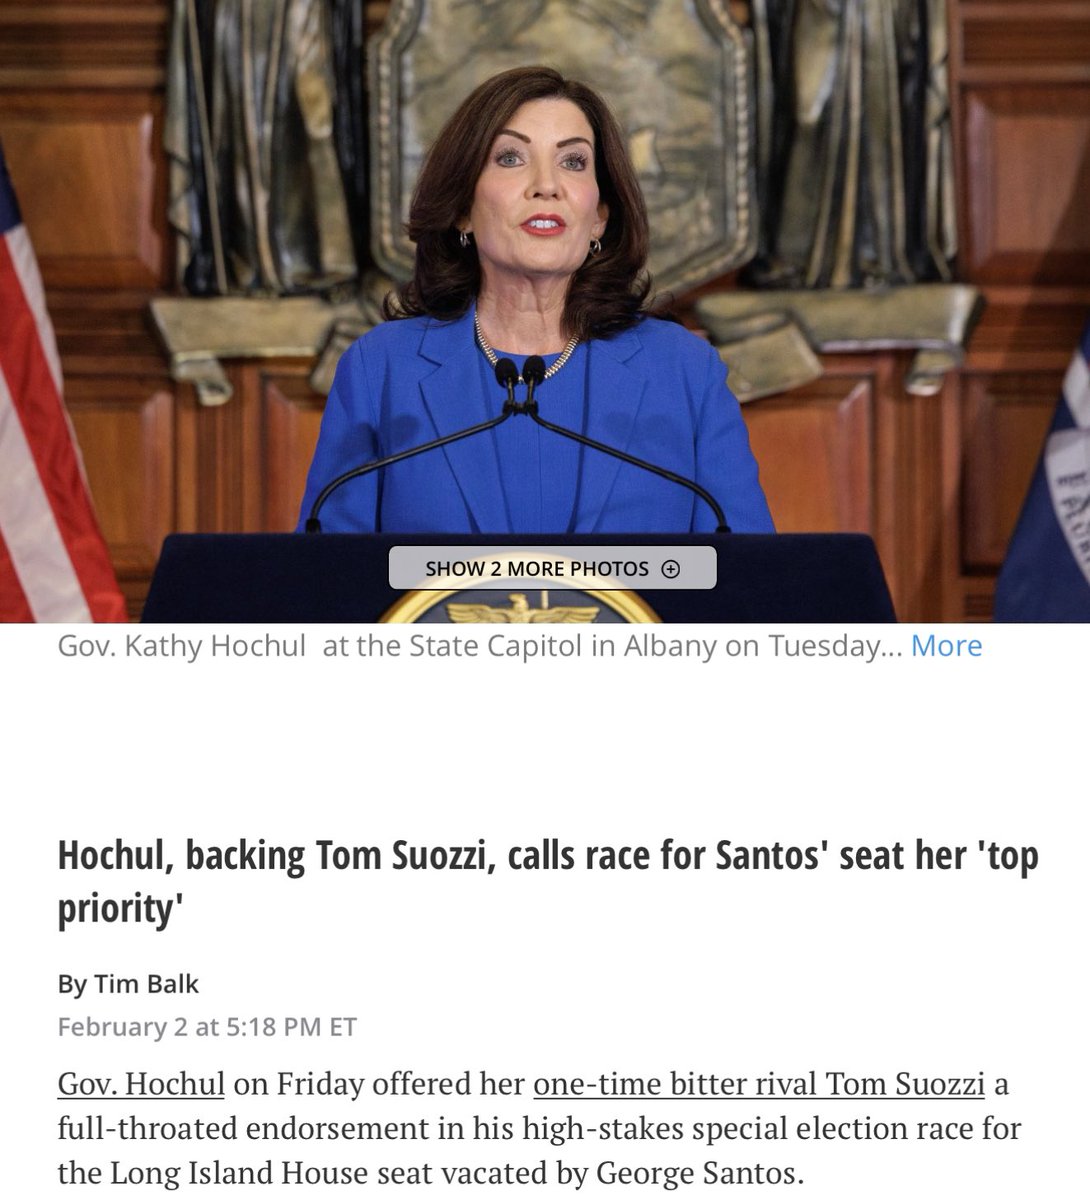 The “top priority” for a dead “weight”? 

. @GovKathyHochul polls 66% disapproval in @Tom_Suozzi district. @HSheinkopf “a Democratic political consultant, said the race carried symbolic weight… ‘Losing this seat would be a tremendous setback perceptually…for Kathy Hochul...’”…